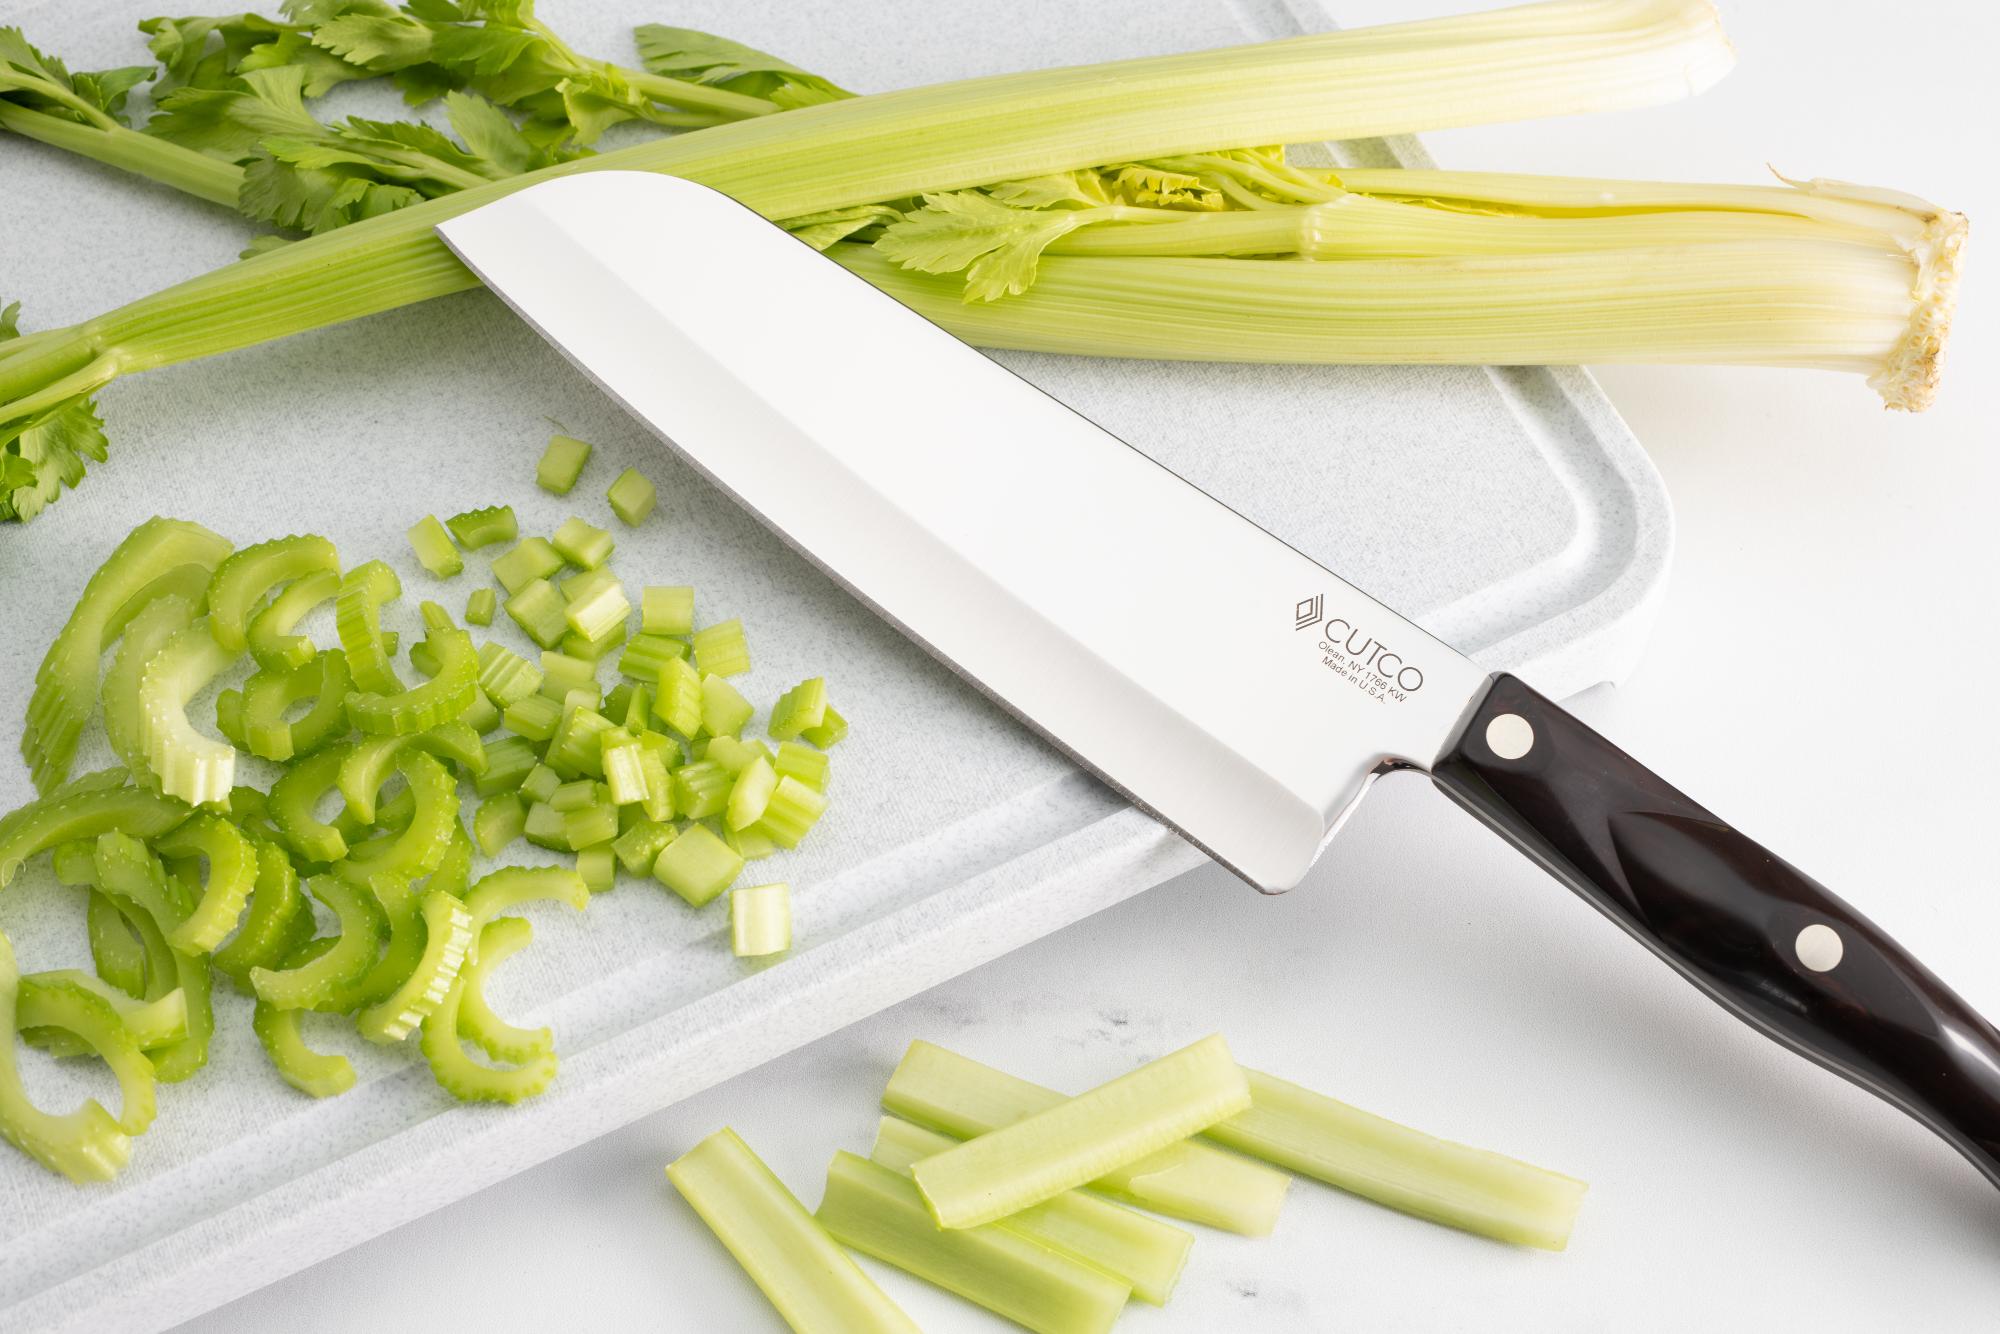 How to Cut Celery: Slice, Dice and Sticks